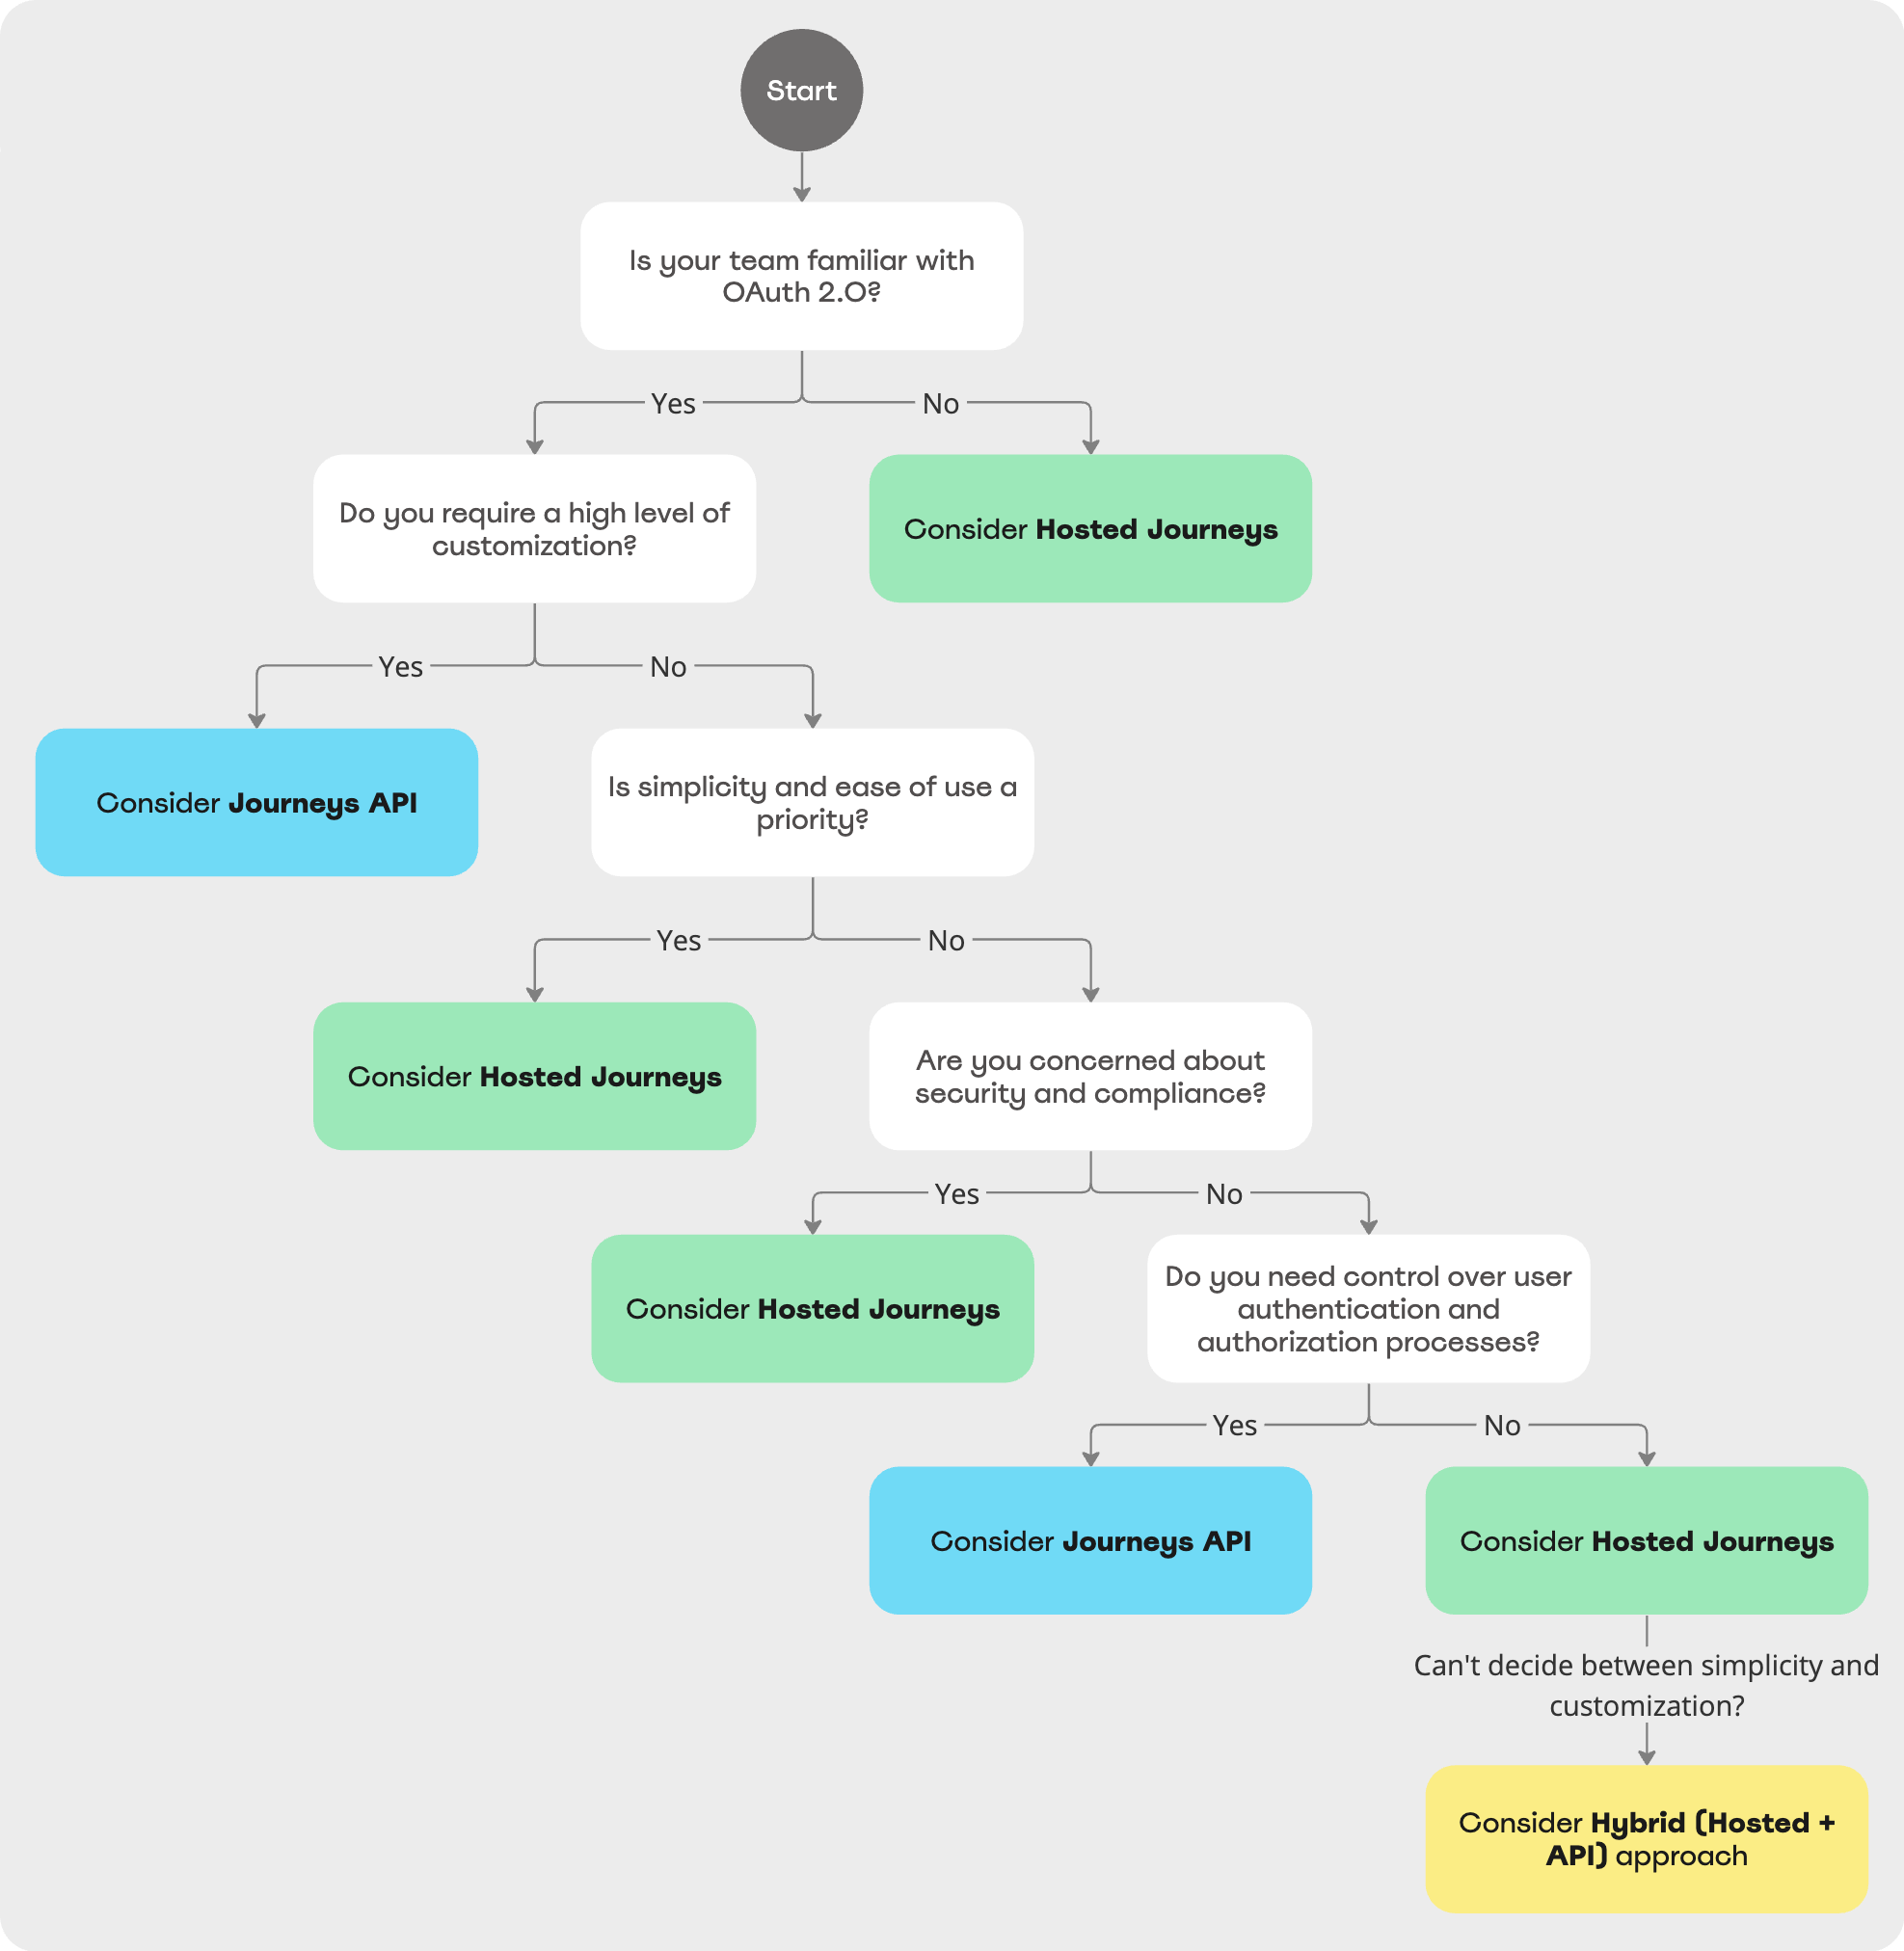 Simplified Decision Tree for Choosing Between Hosted Journeys, Journeys API, and Hybrid Approach